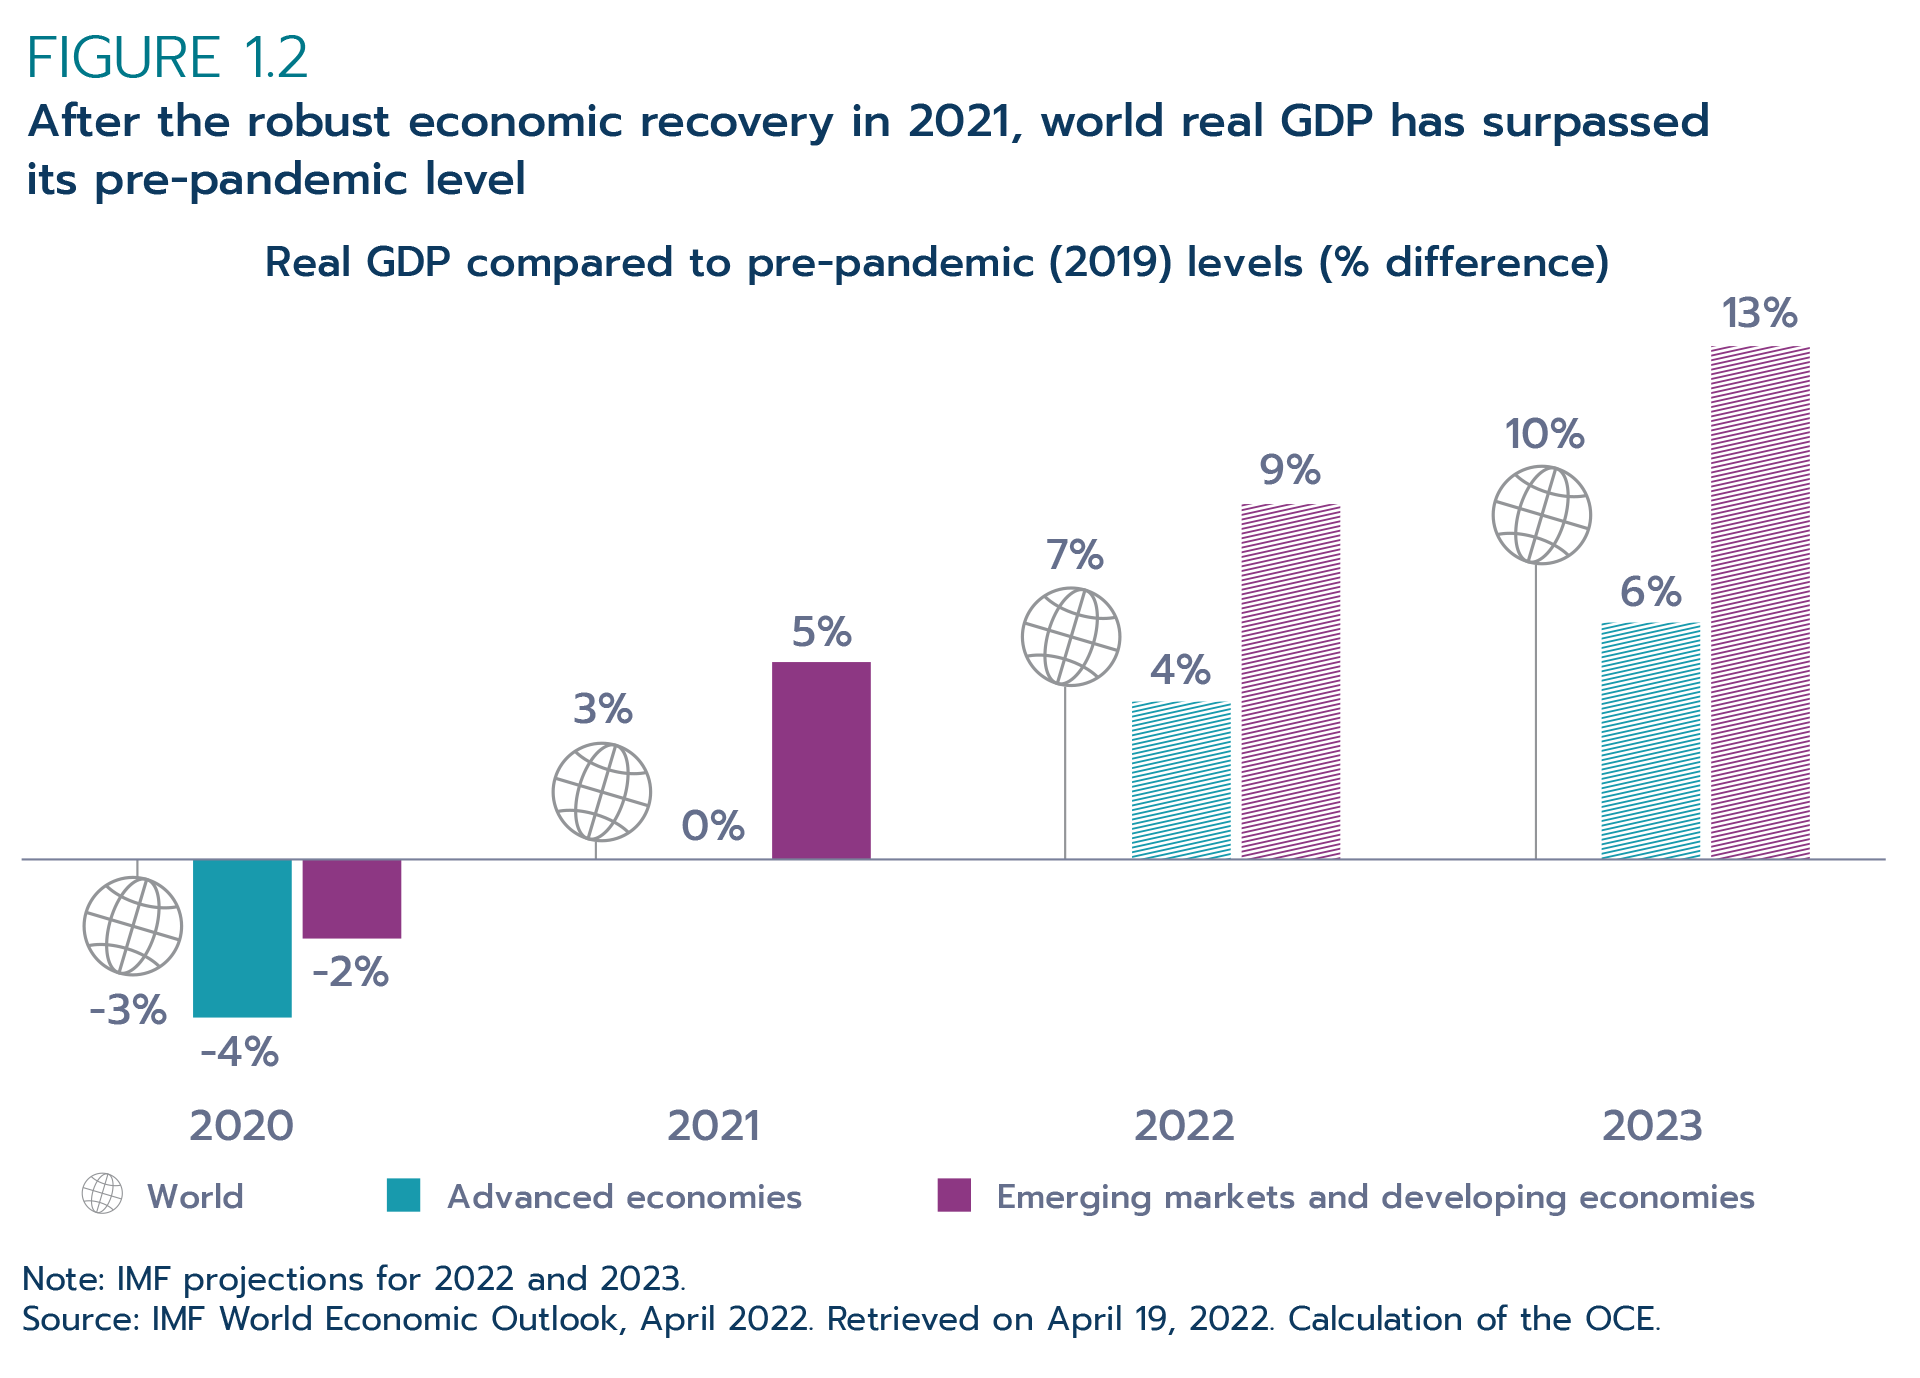 Figure 1.2: After the robust economic recovery in 2021, world real GDP has surpassed its pre-pandemic level